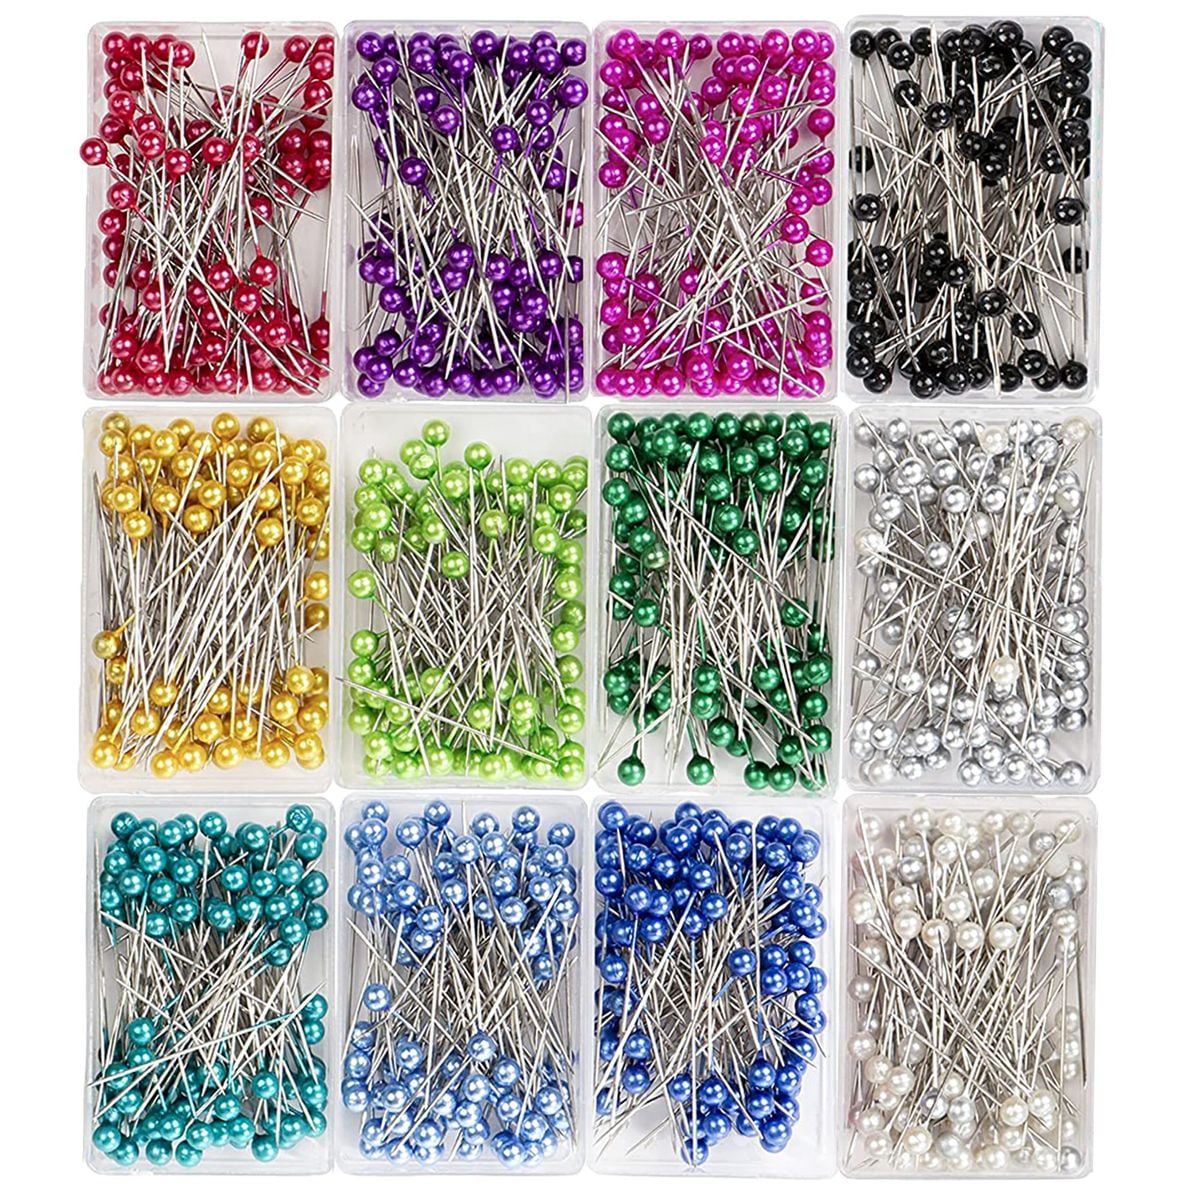 144 Pearl Head Pins 10 Coloured Options for Dressmaking Craft Sewing & Florists 